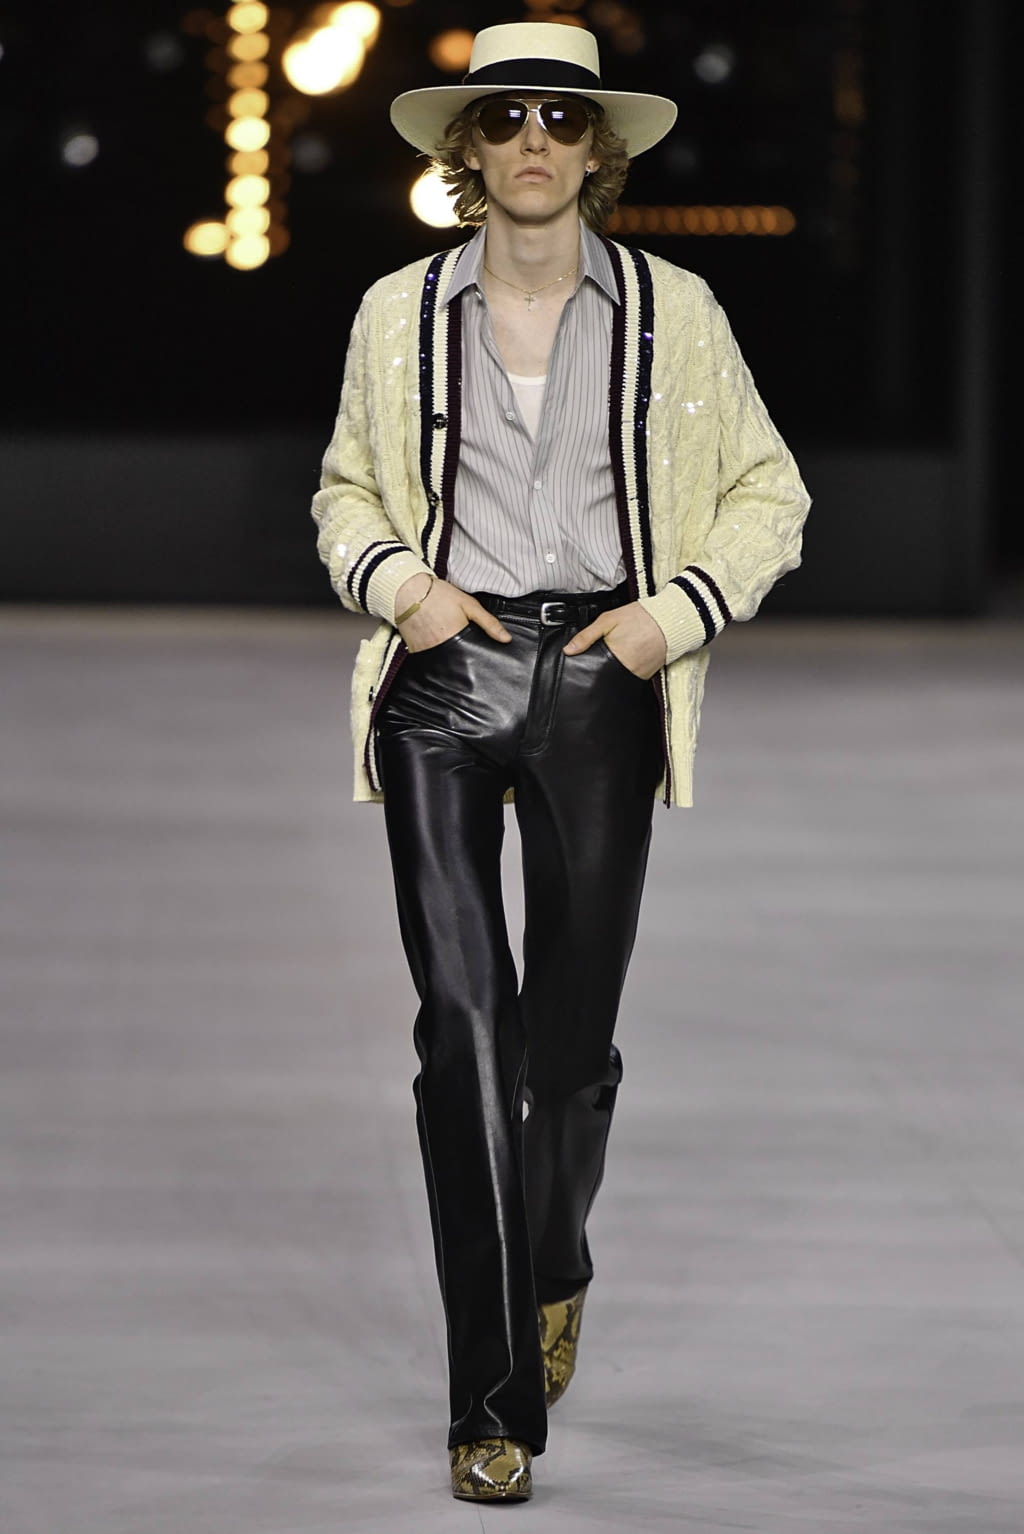 The Top 12 Spring 2020 Menswear Collections